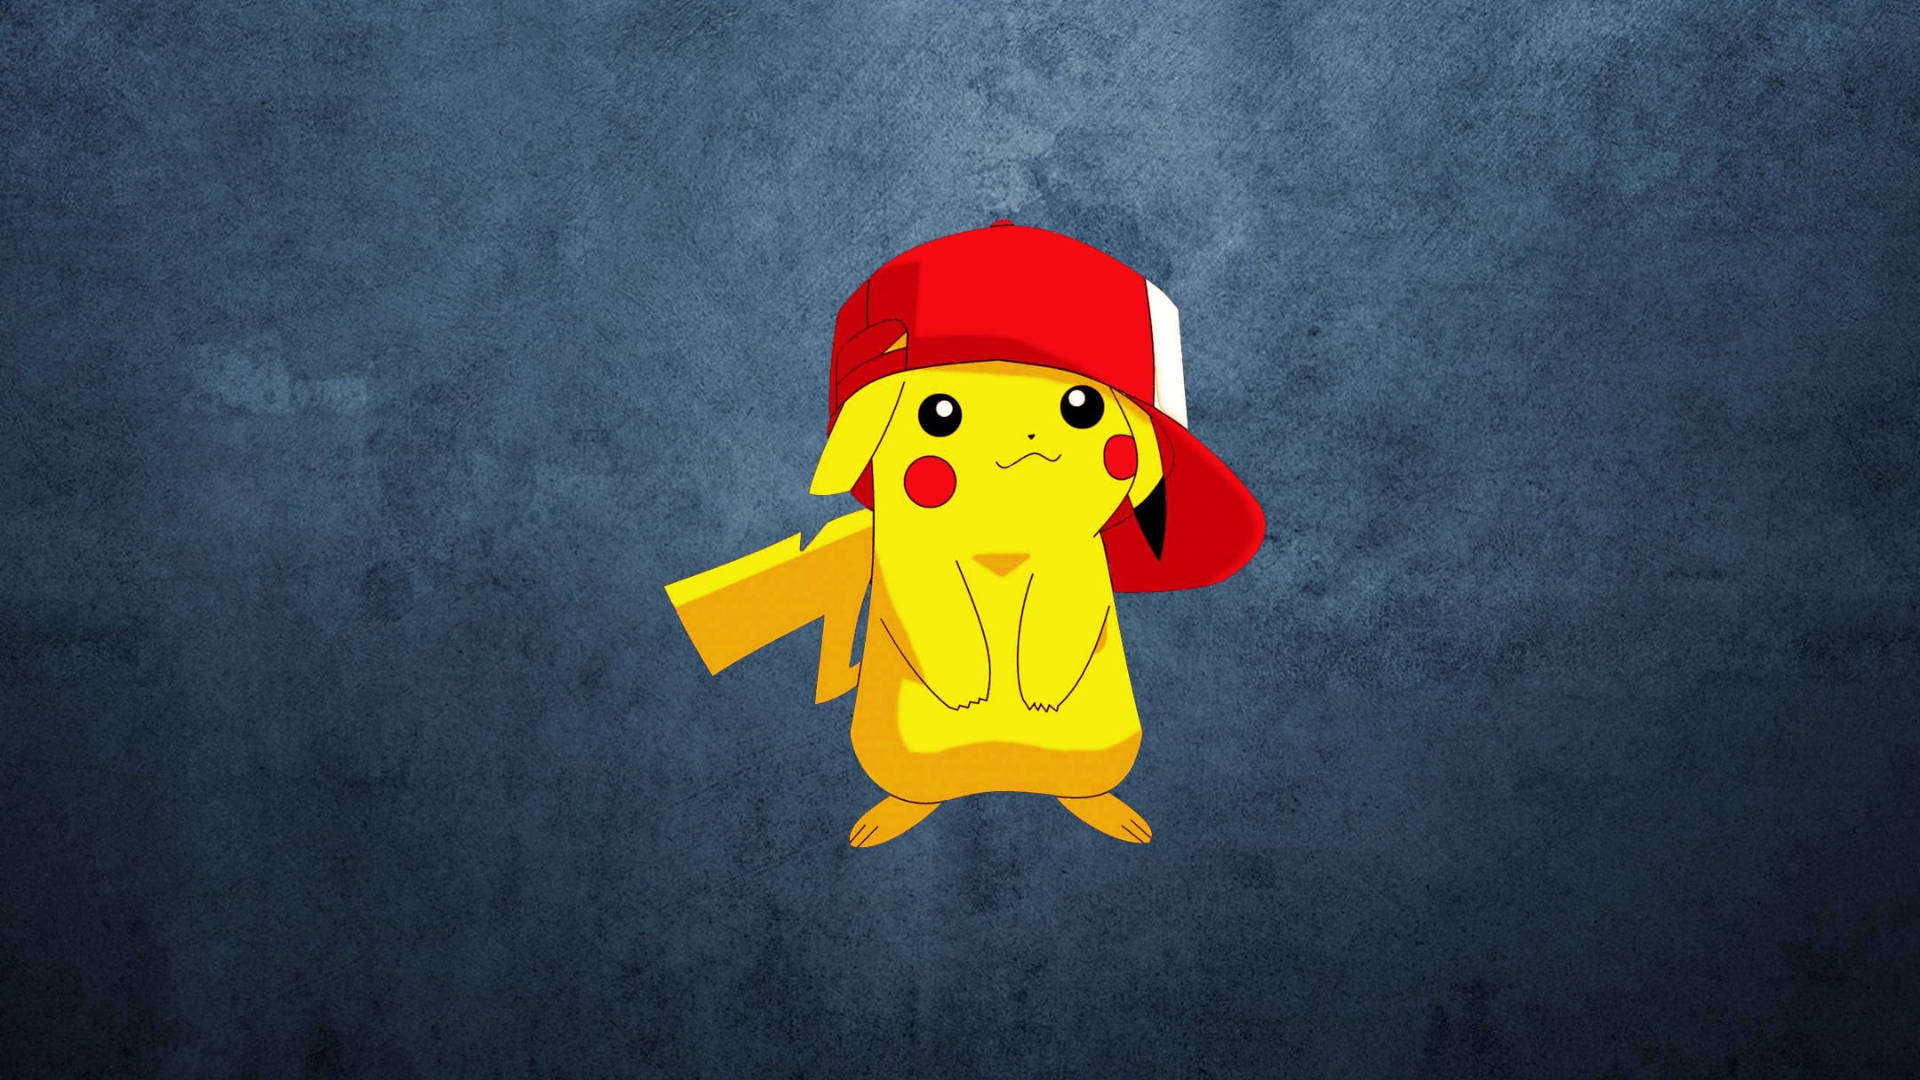 Cool And Cute Pikachu Pokemon Character Background